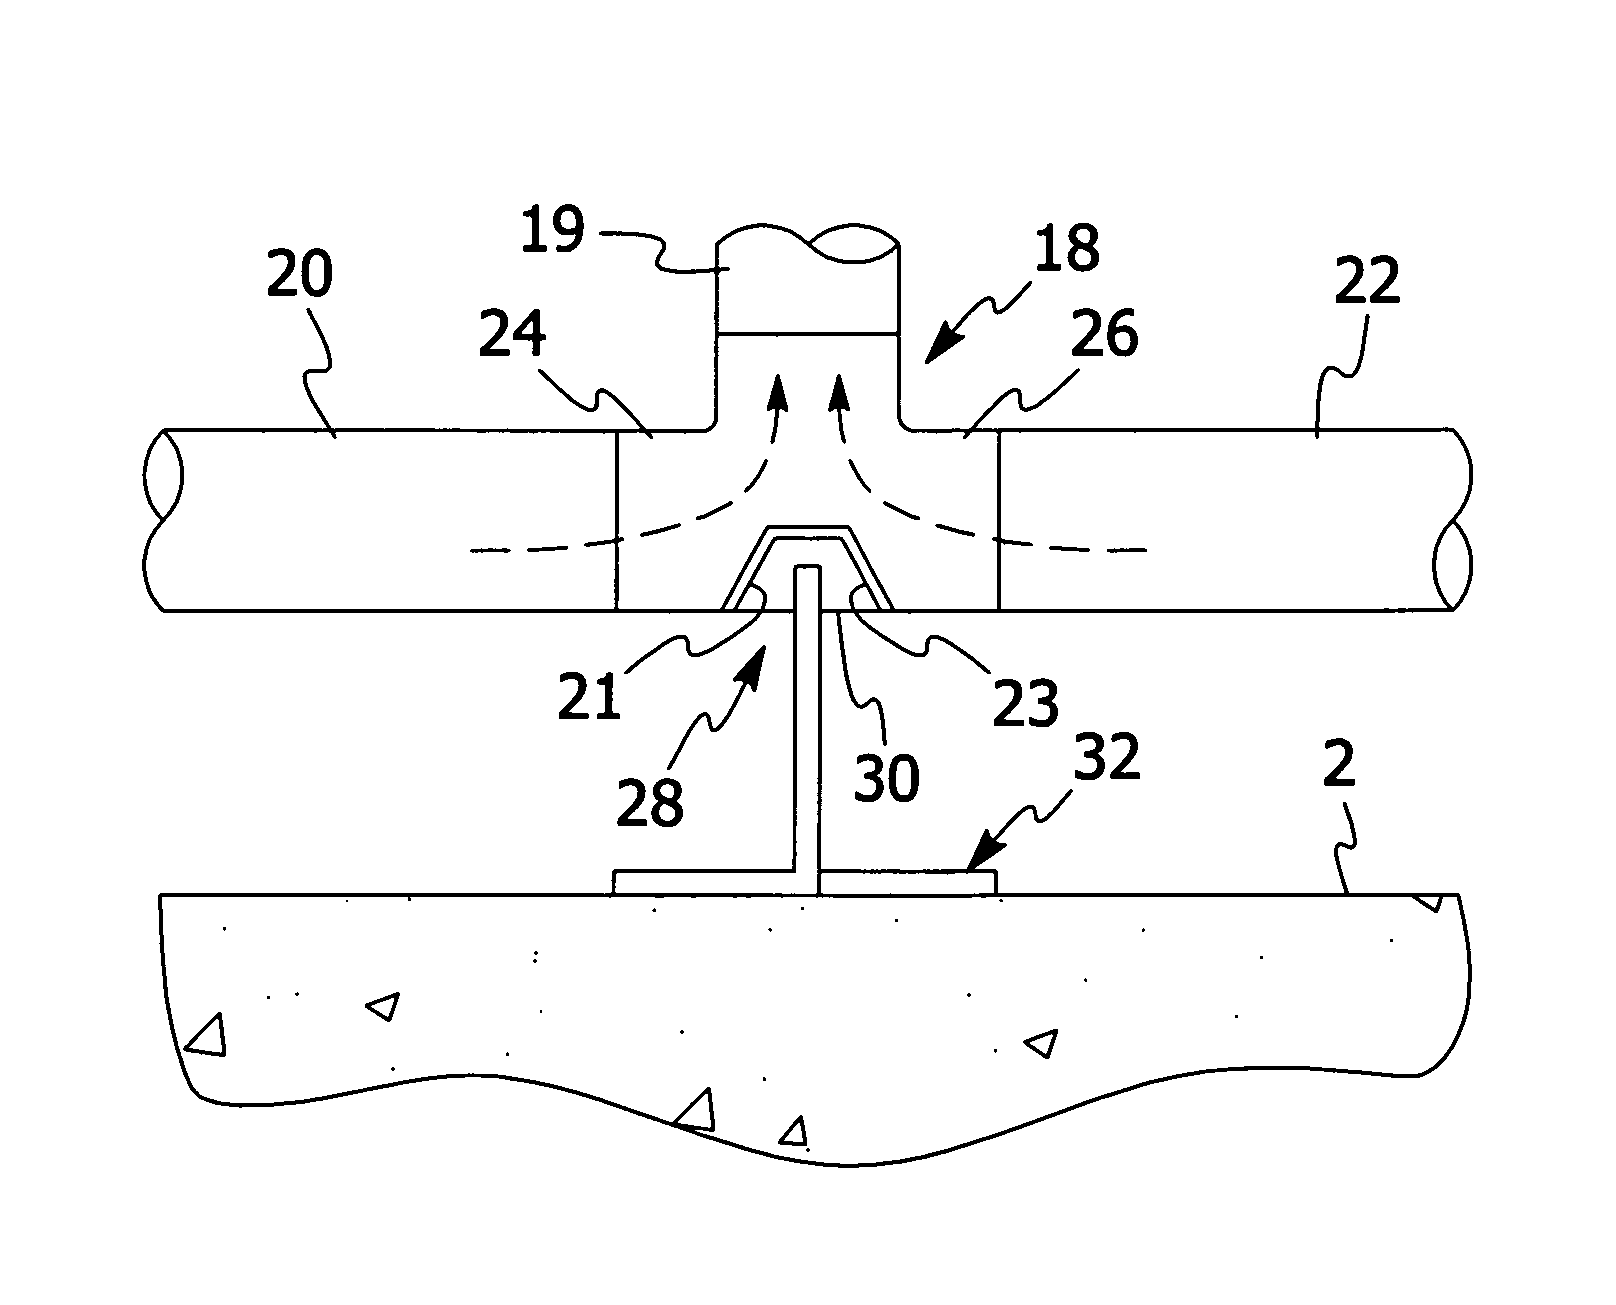 Apparatus and method for removing materials from a material collection container